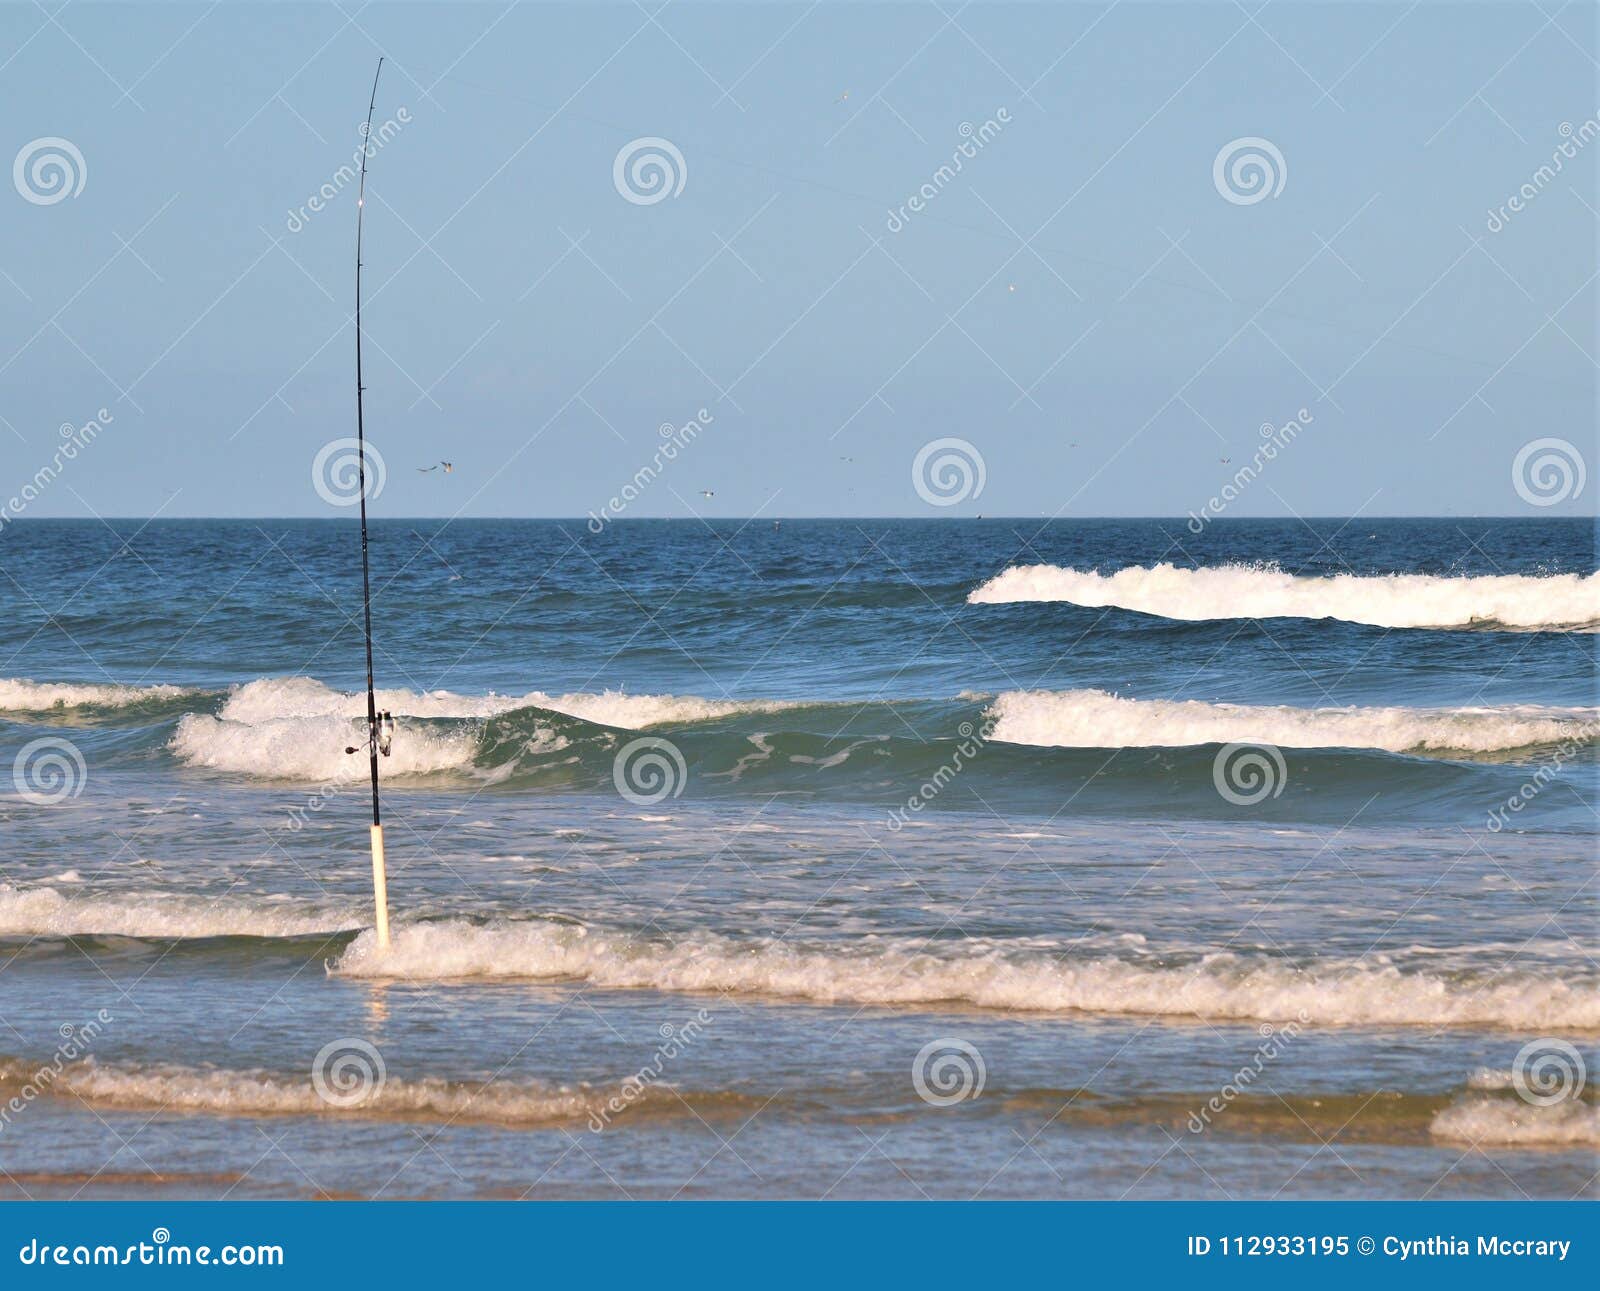 https://thumbs.dreamstime.com/z/surf-fishing-new-smyrna-beach-florida-surf-fishing-pole-stands-anchored-sand-breakers-new-smyrna-beach-112933195.jpg